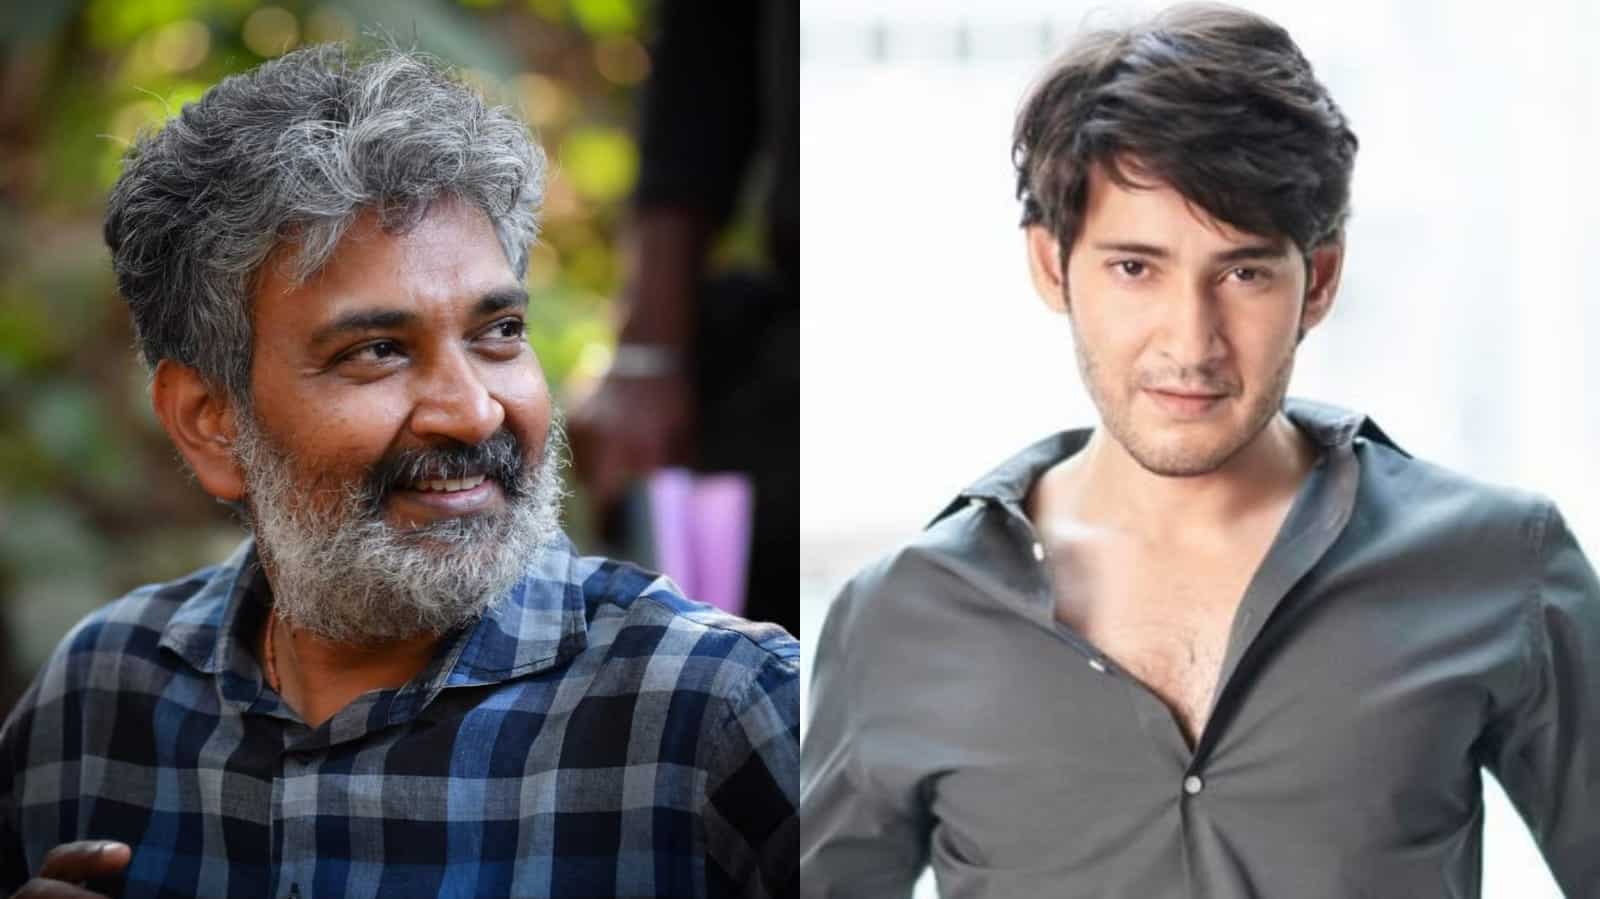 https://www.mobilemasala.com/film-gossip/No-one-can-imagine-what-you-are-going-to-see-in-Rajamoulis-next-with-Mahesh-Babu-says-Vijayendra-Prasad-i208582